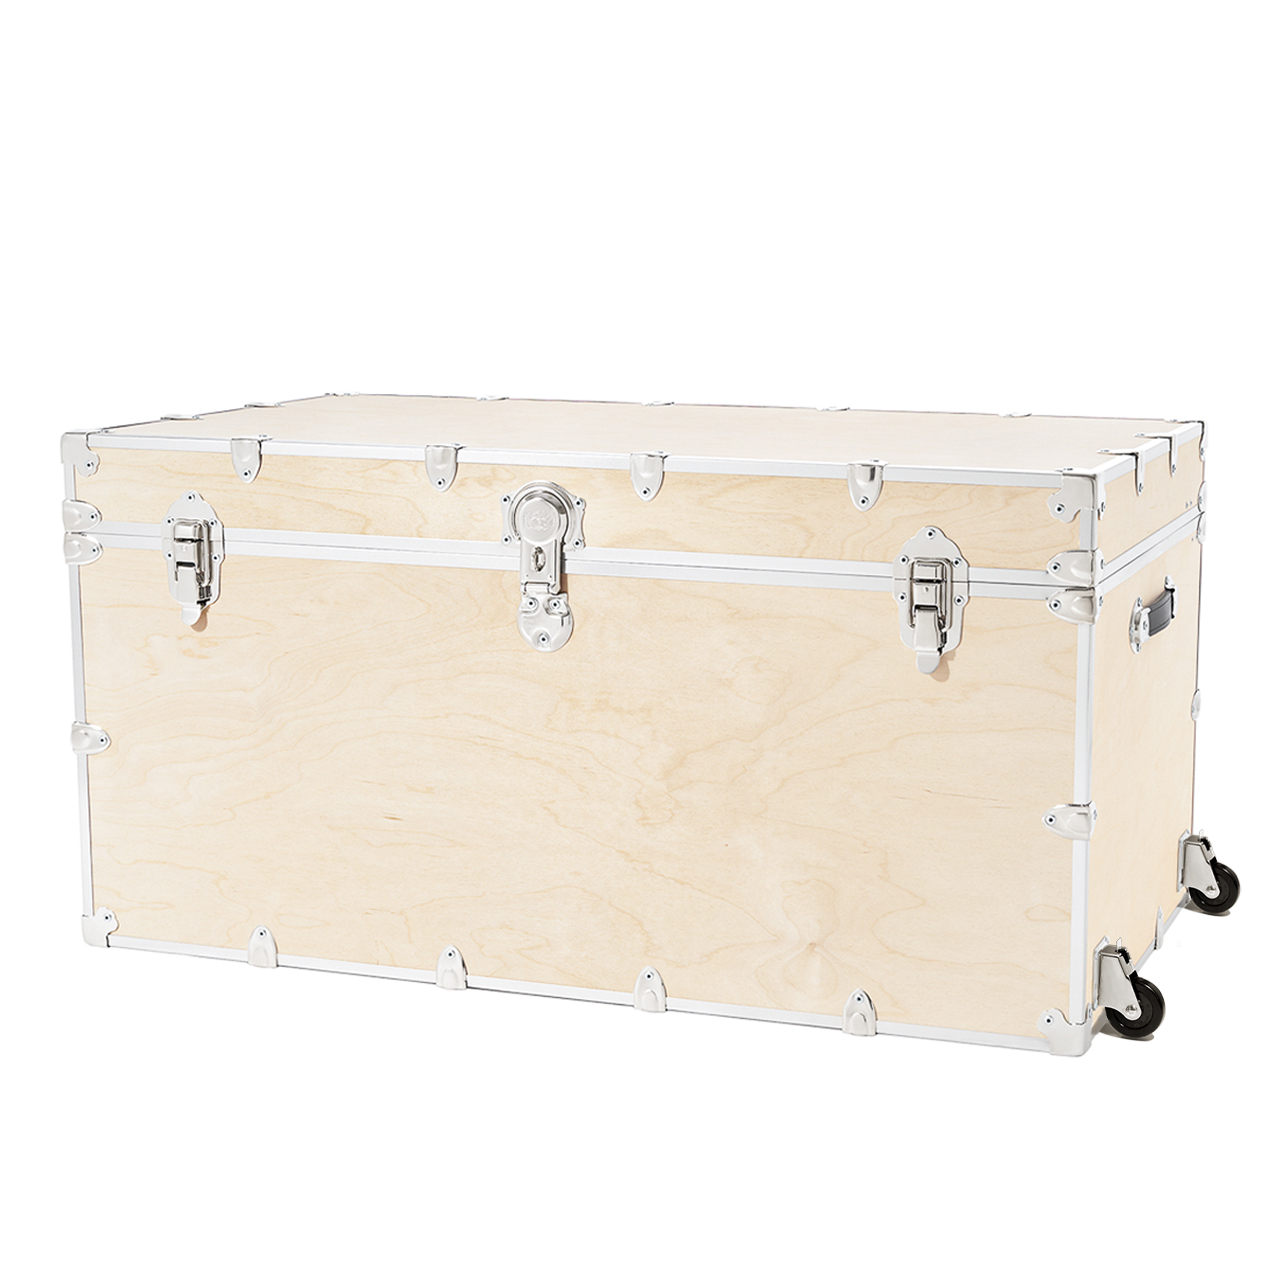  Rhino Trunk and Case Rhino Trunk & Case Rhino Naked Large Trunk  with Wheels, 32X18X14, Brown : Automotive